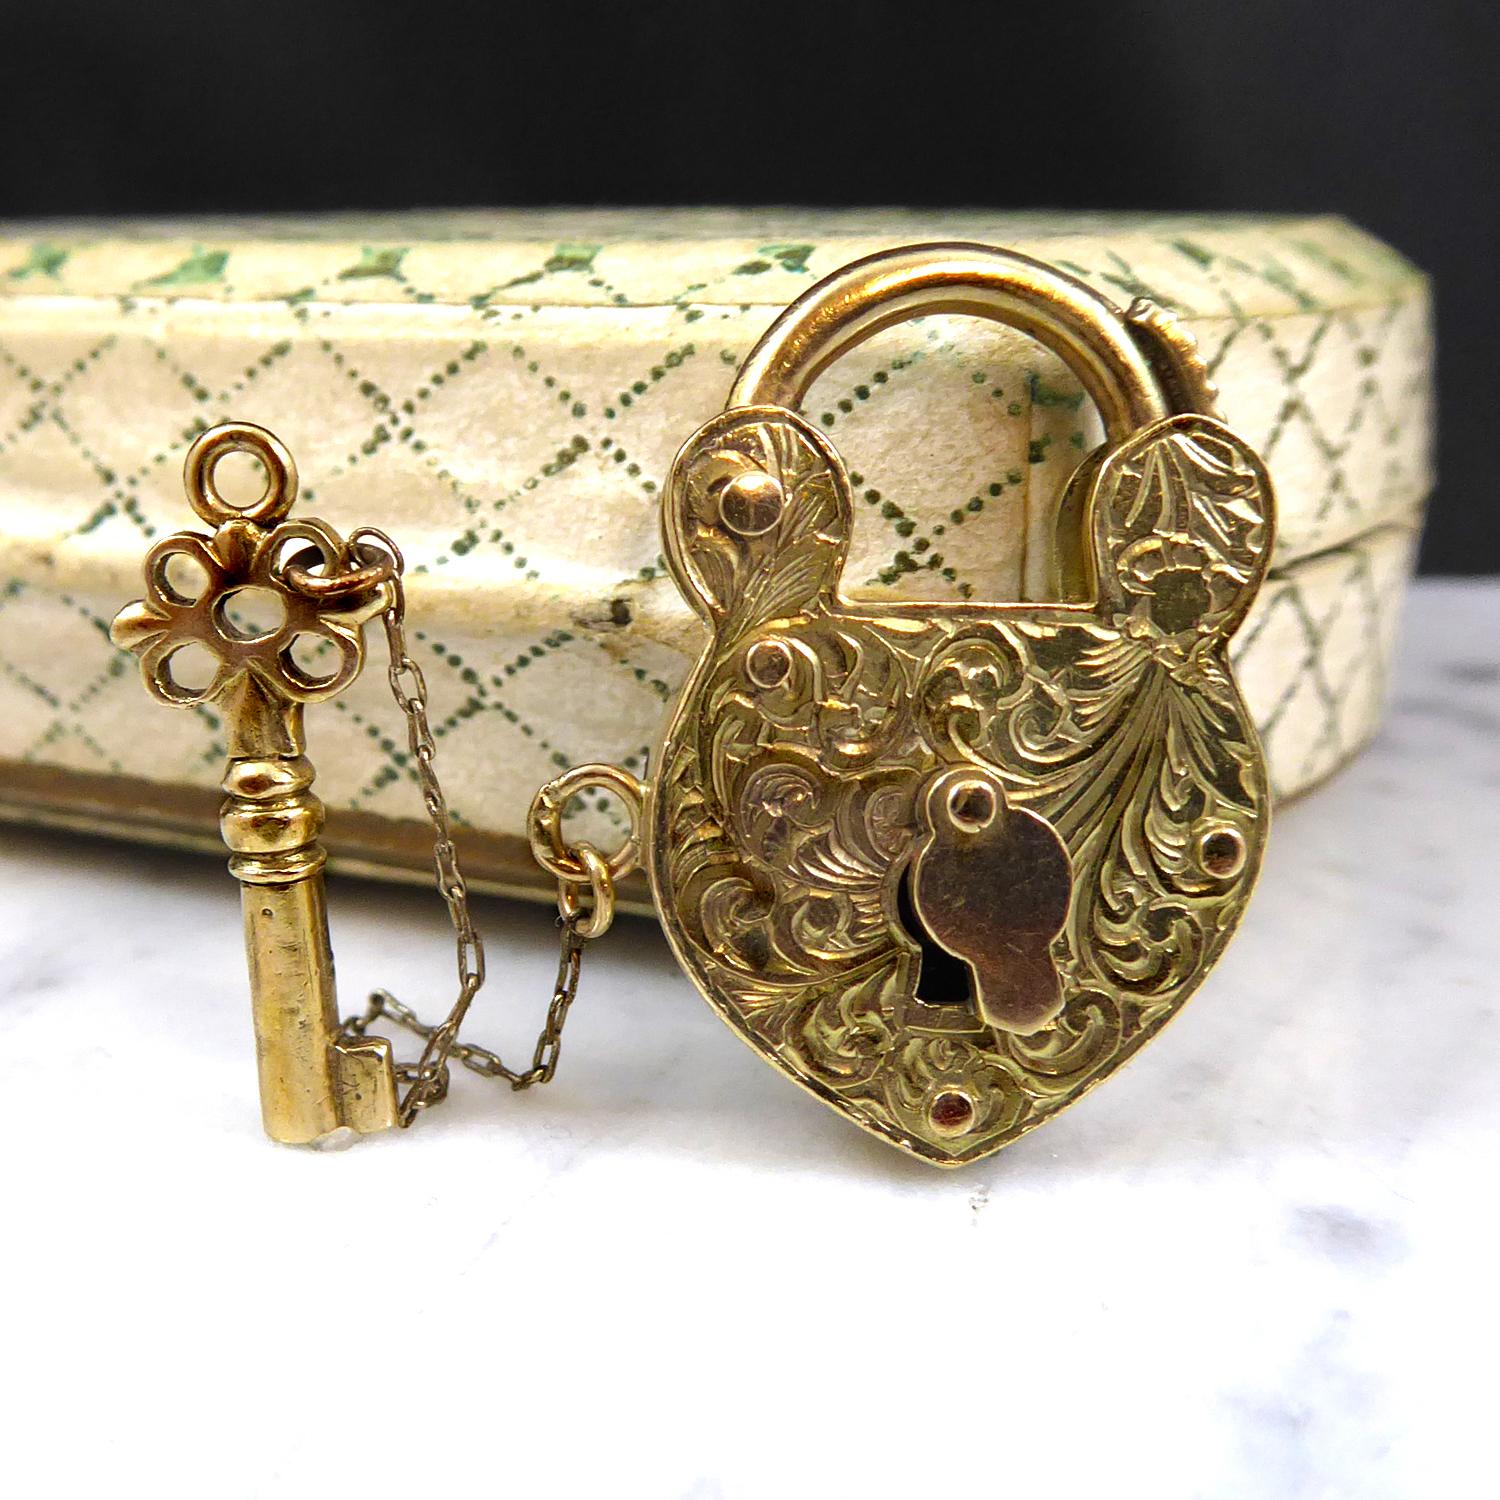 A vintage gold padlock with arabesque engraving to the front and plain polished on the reverse.  The padlock, unusually, is fully-functioning complete with an attached key that can be used to lock the padlock.  The key is attached via a gold chain